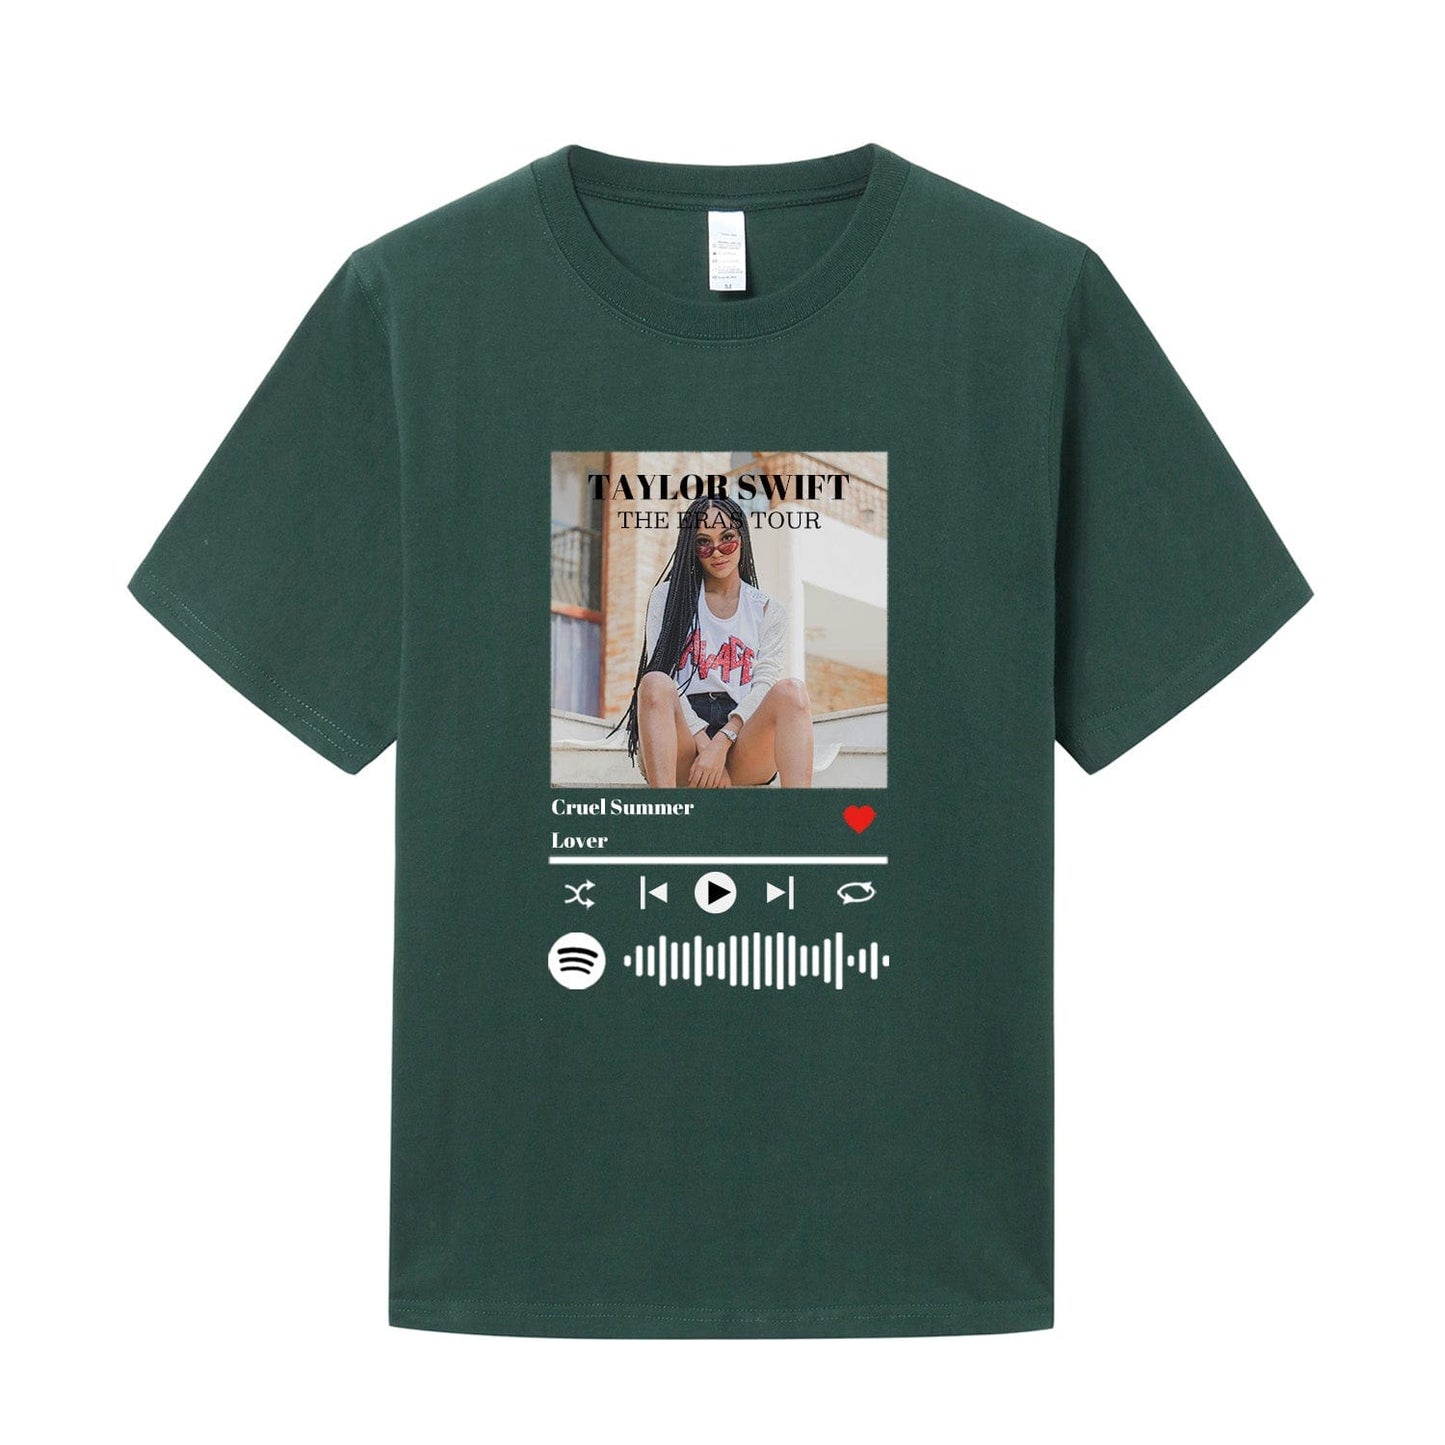 Custom Spotify Scannable Music Code T-shirt With Photo